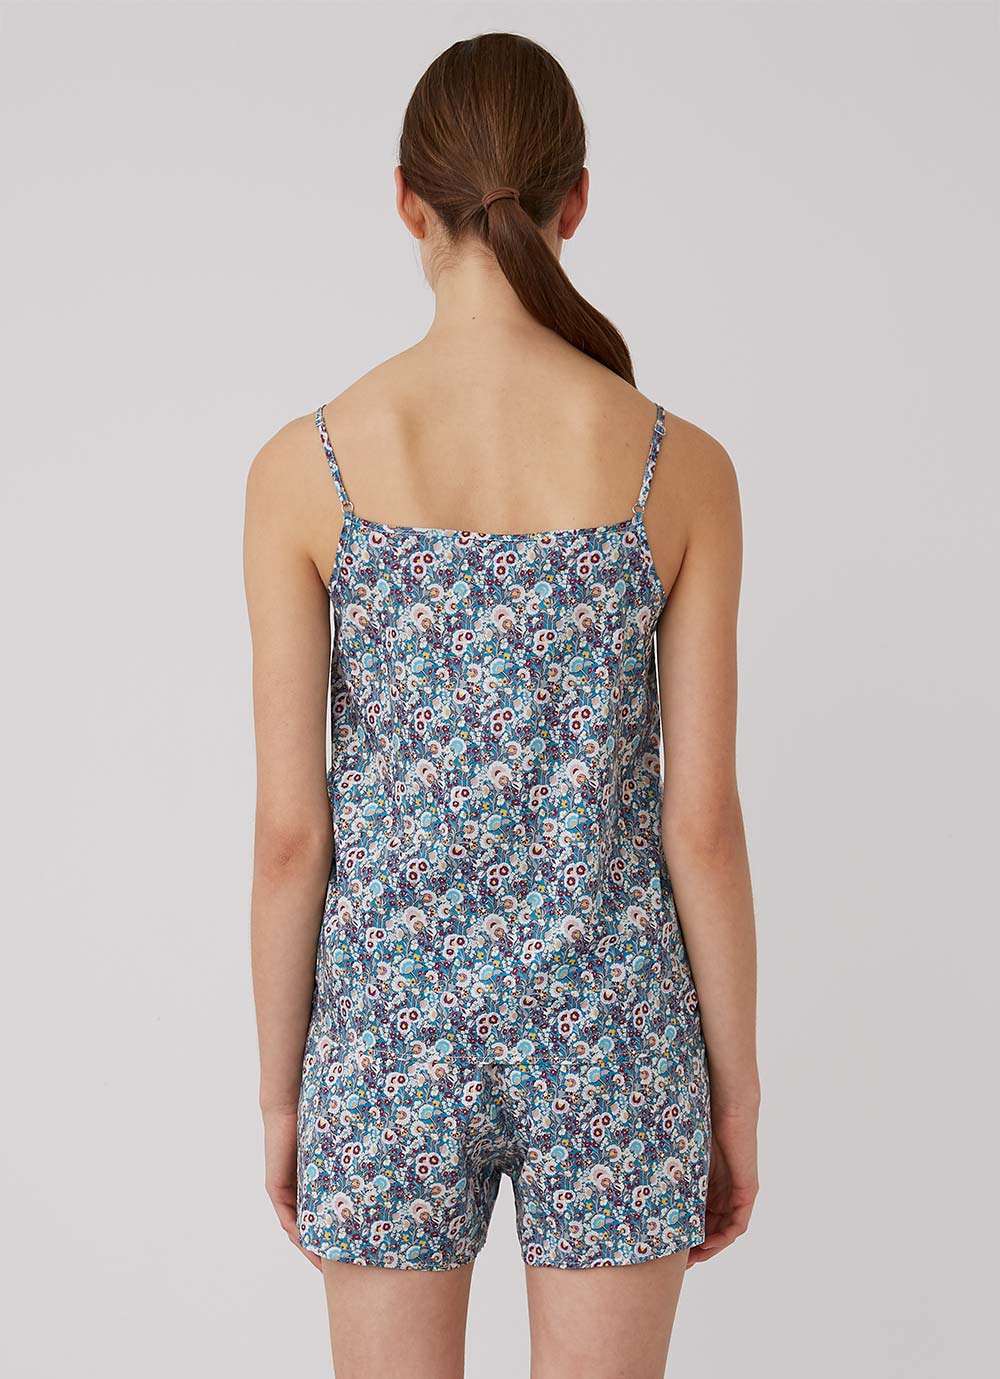 Women's Printed Cotton Cami in Liberty Summer Bouquet